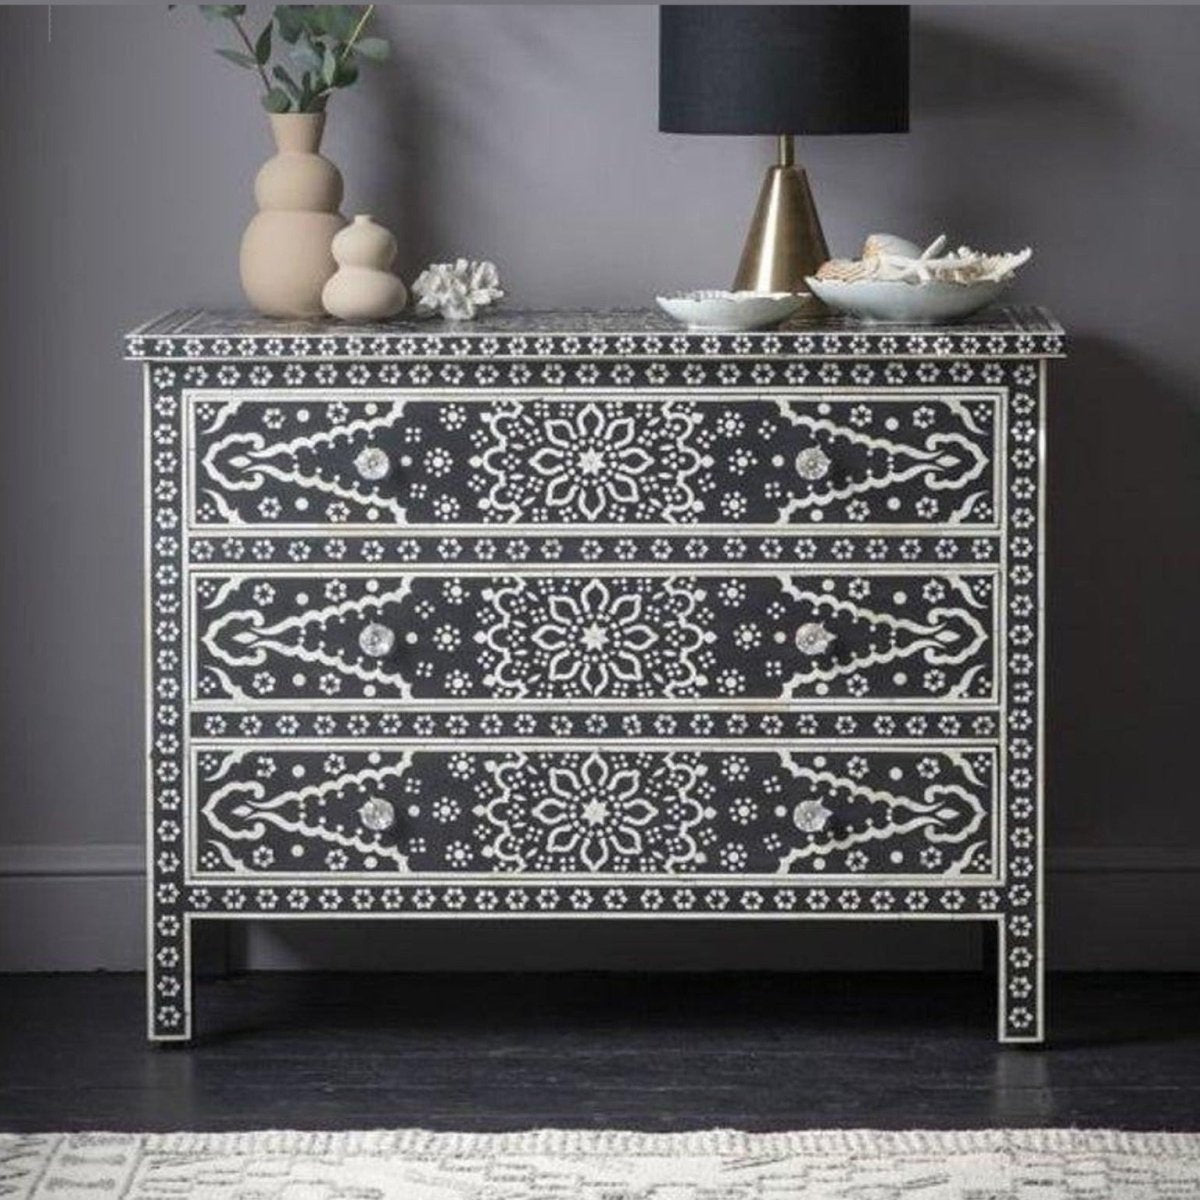 Bone Inlay 3 Drawers Dresser in Black Color | Handmade Luxury Chest of 3 Drawers chest of drawer - Bone Inlay Furnitures